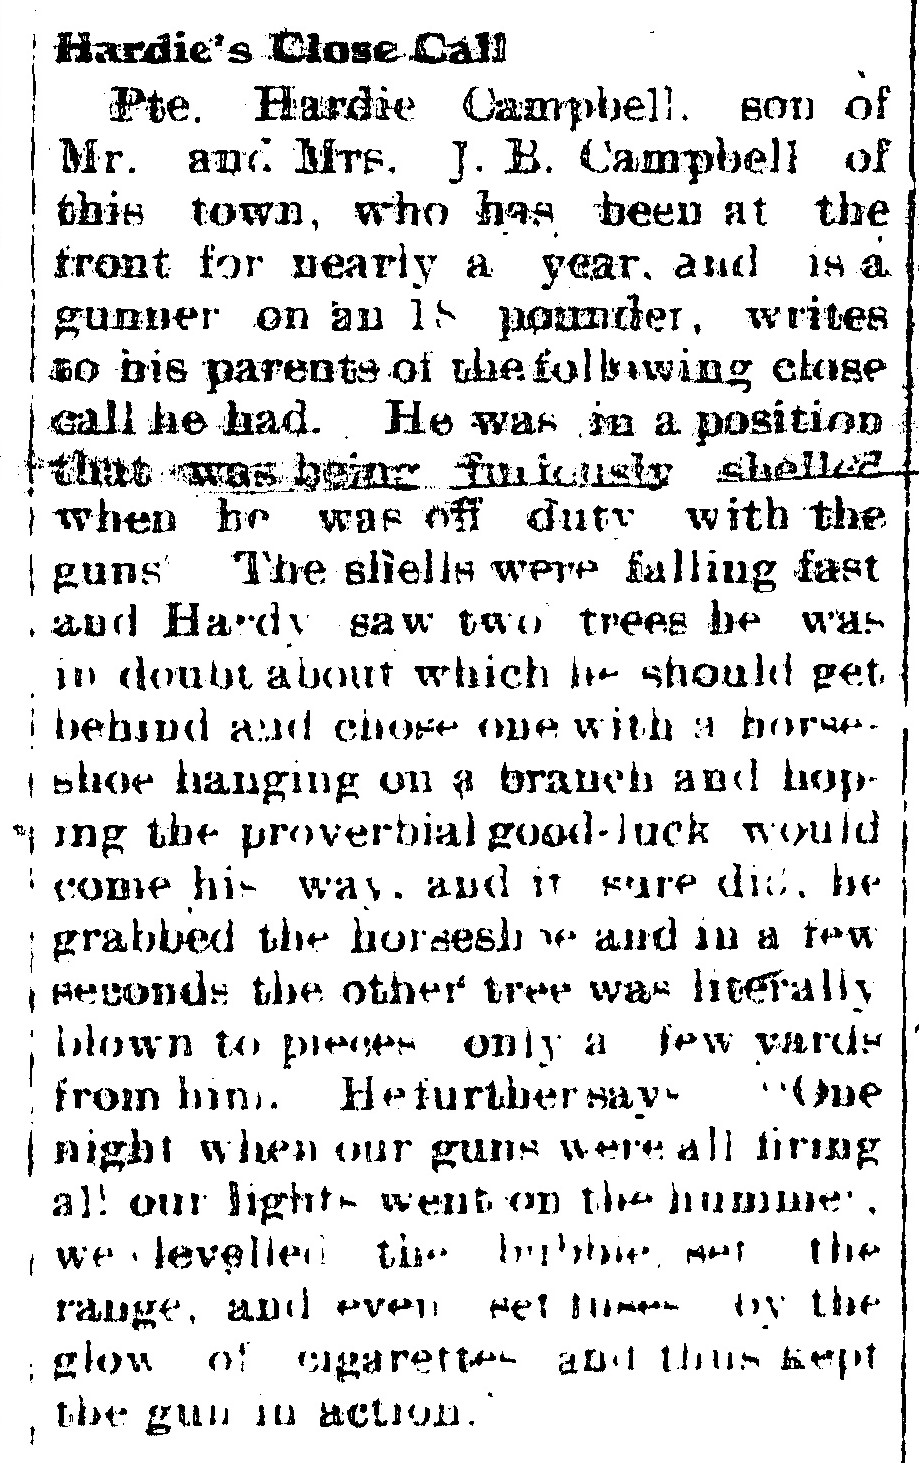 The Chesley Enterprise, January 24, 1918